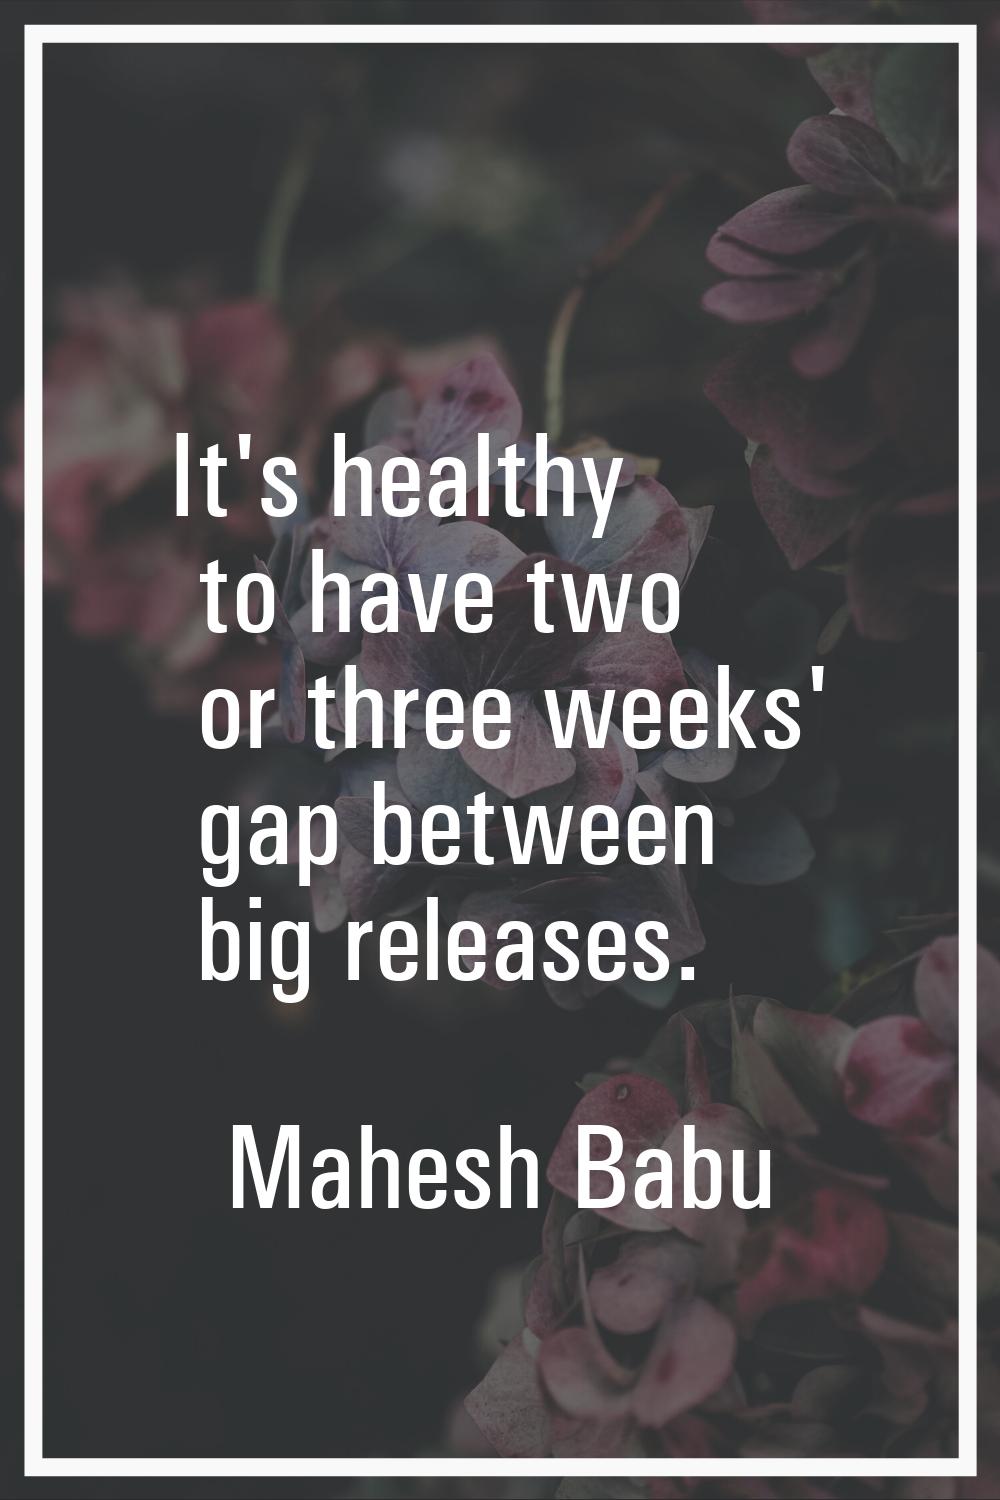 It's healthy to have two or three weeks' gap between big releases.